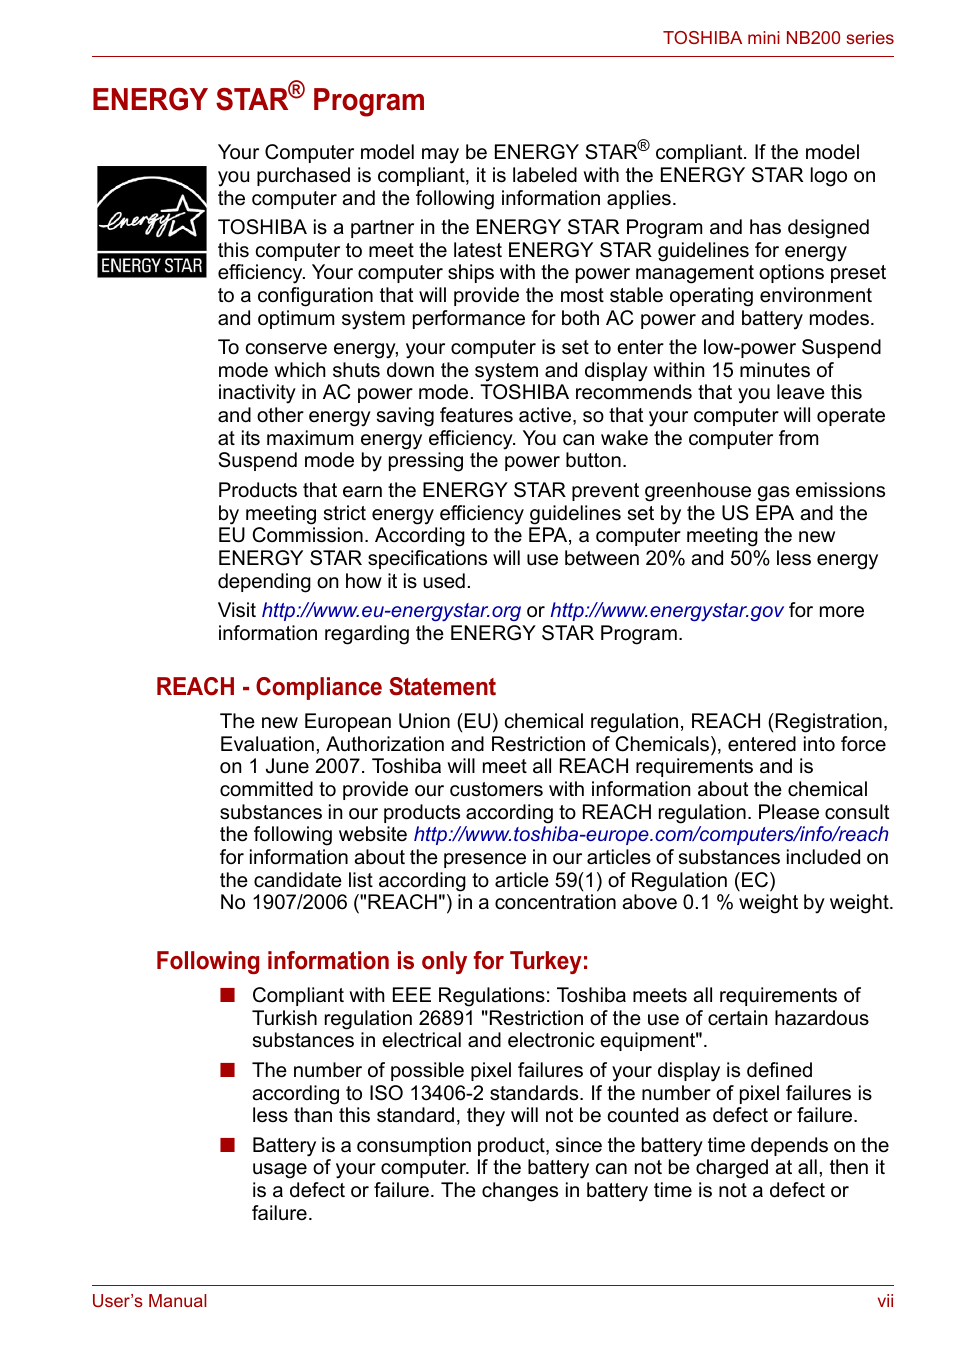 Energy star, Program, Reach - compliance statement | Following information is only for turkey | Toshiba NB200 User Manual | Page 7 / 138